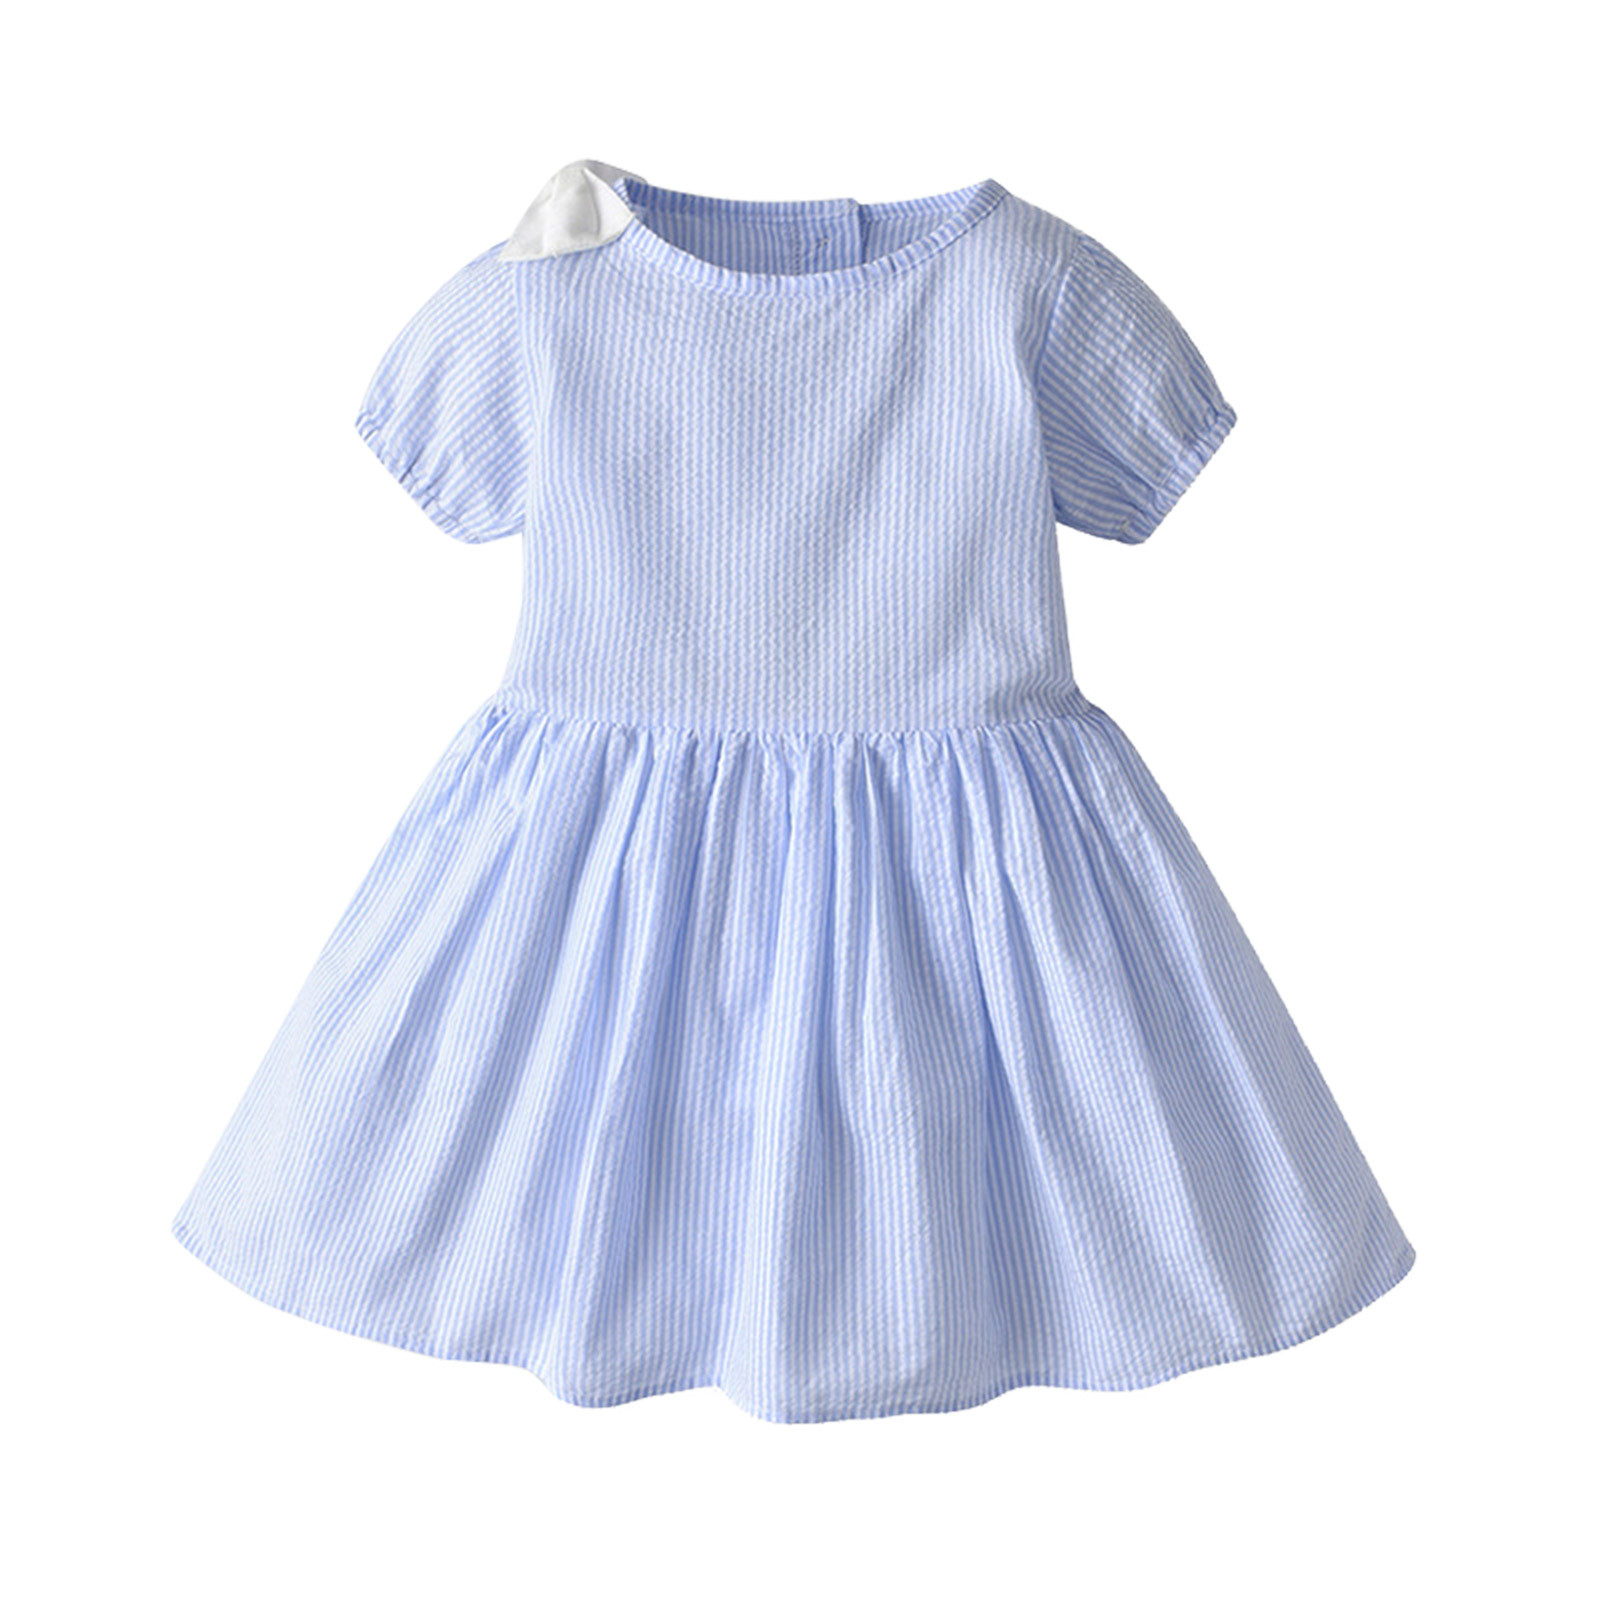 ZHAGHMIN Girls Spring Outfits Size 7/8 Kids Toddler Baby Girls Spring ...